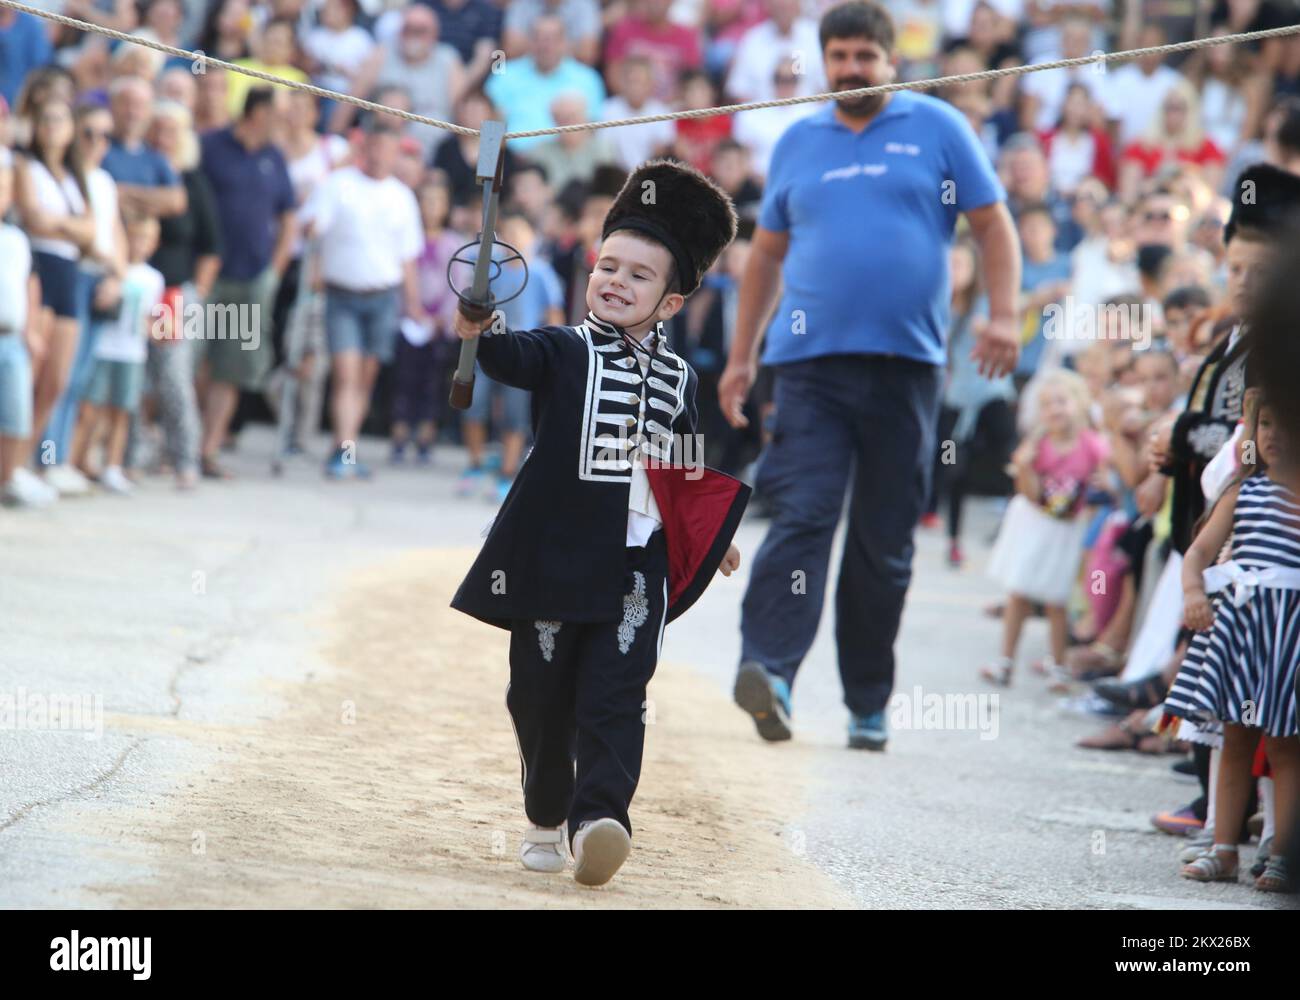 20.08.2017., Brnaze, Croatia - Alkar Fico runs during the Children's Alka tournament in Vuckovici village, Croatia, August 20, 2017. Children's Alka is a tournament which has been held every August in the Croatian village of Vuckovici since 1955. in memory of their ancestors Father Pavao, Boze, Tadija and Zec, whose heroism and bravery made them become prominent in the decisive battle against the Ottomans in 1715. Only boys up to 10 years can participate. Photo: Ivo Cagalj/PIXSELL Stock Photo